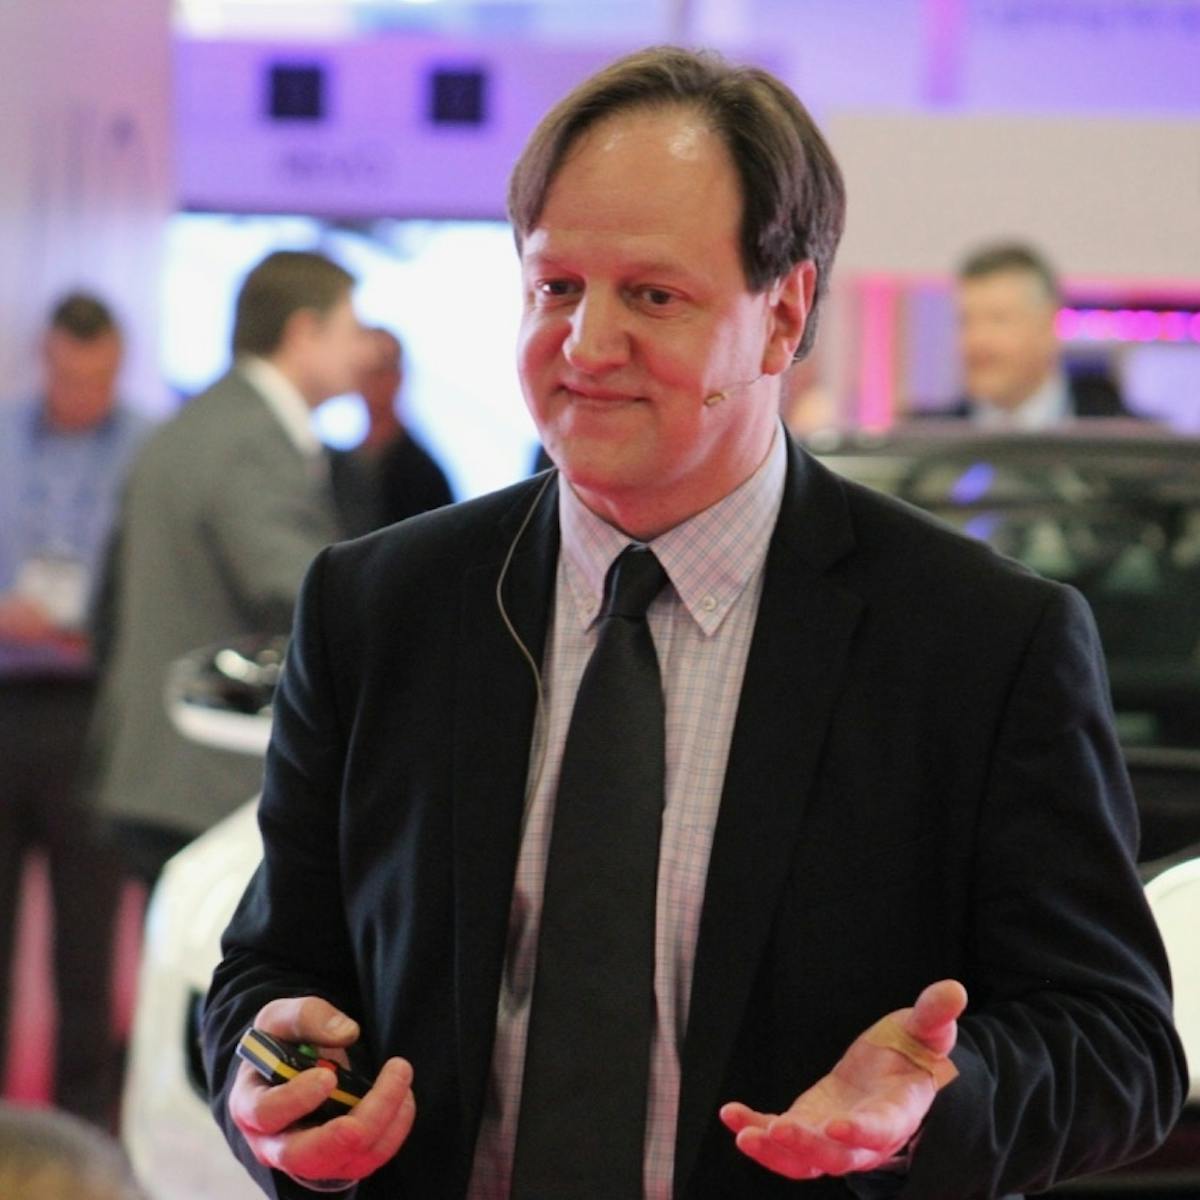 Harald Haas has been extolling the virtues of Li-Fi for over a decade as co-founder of pureLiFi, in its early days called pureVLC. Here he is presenting at the LuxLive exhibition in London in November 2016. (Photo credit: Image courtesy of Mark Halper.)